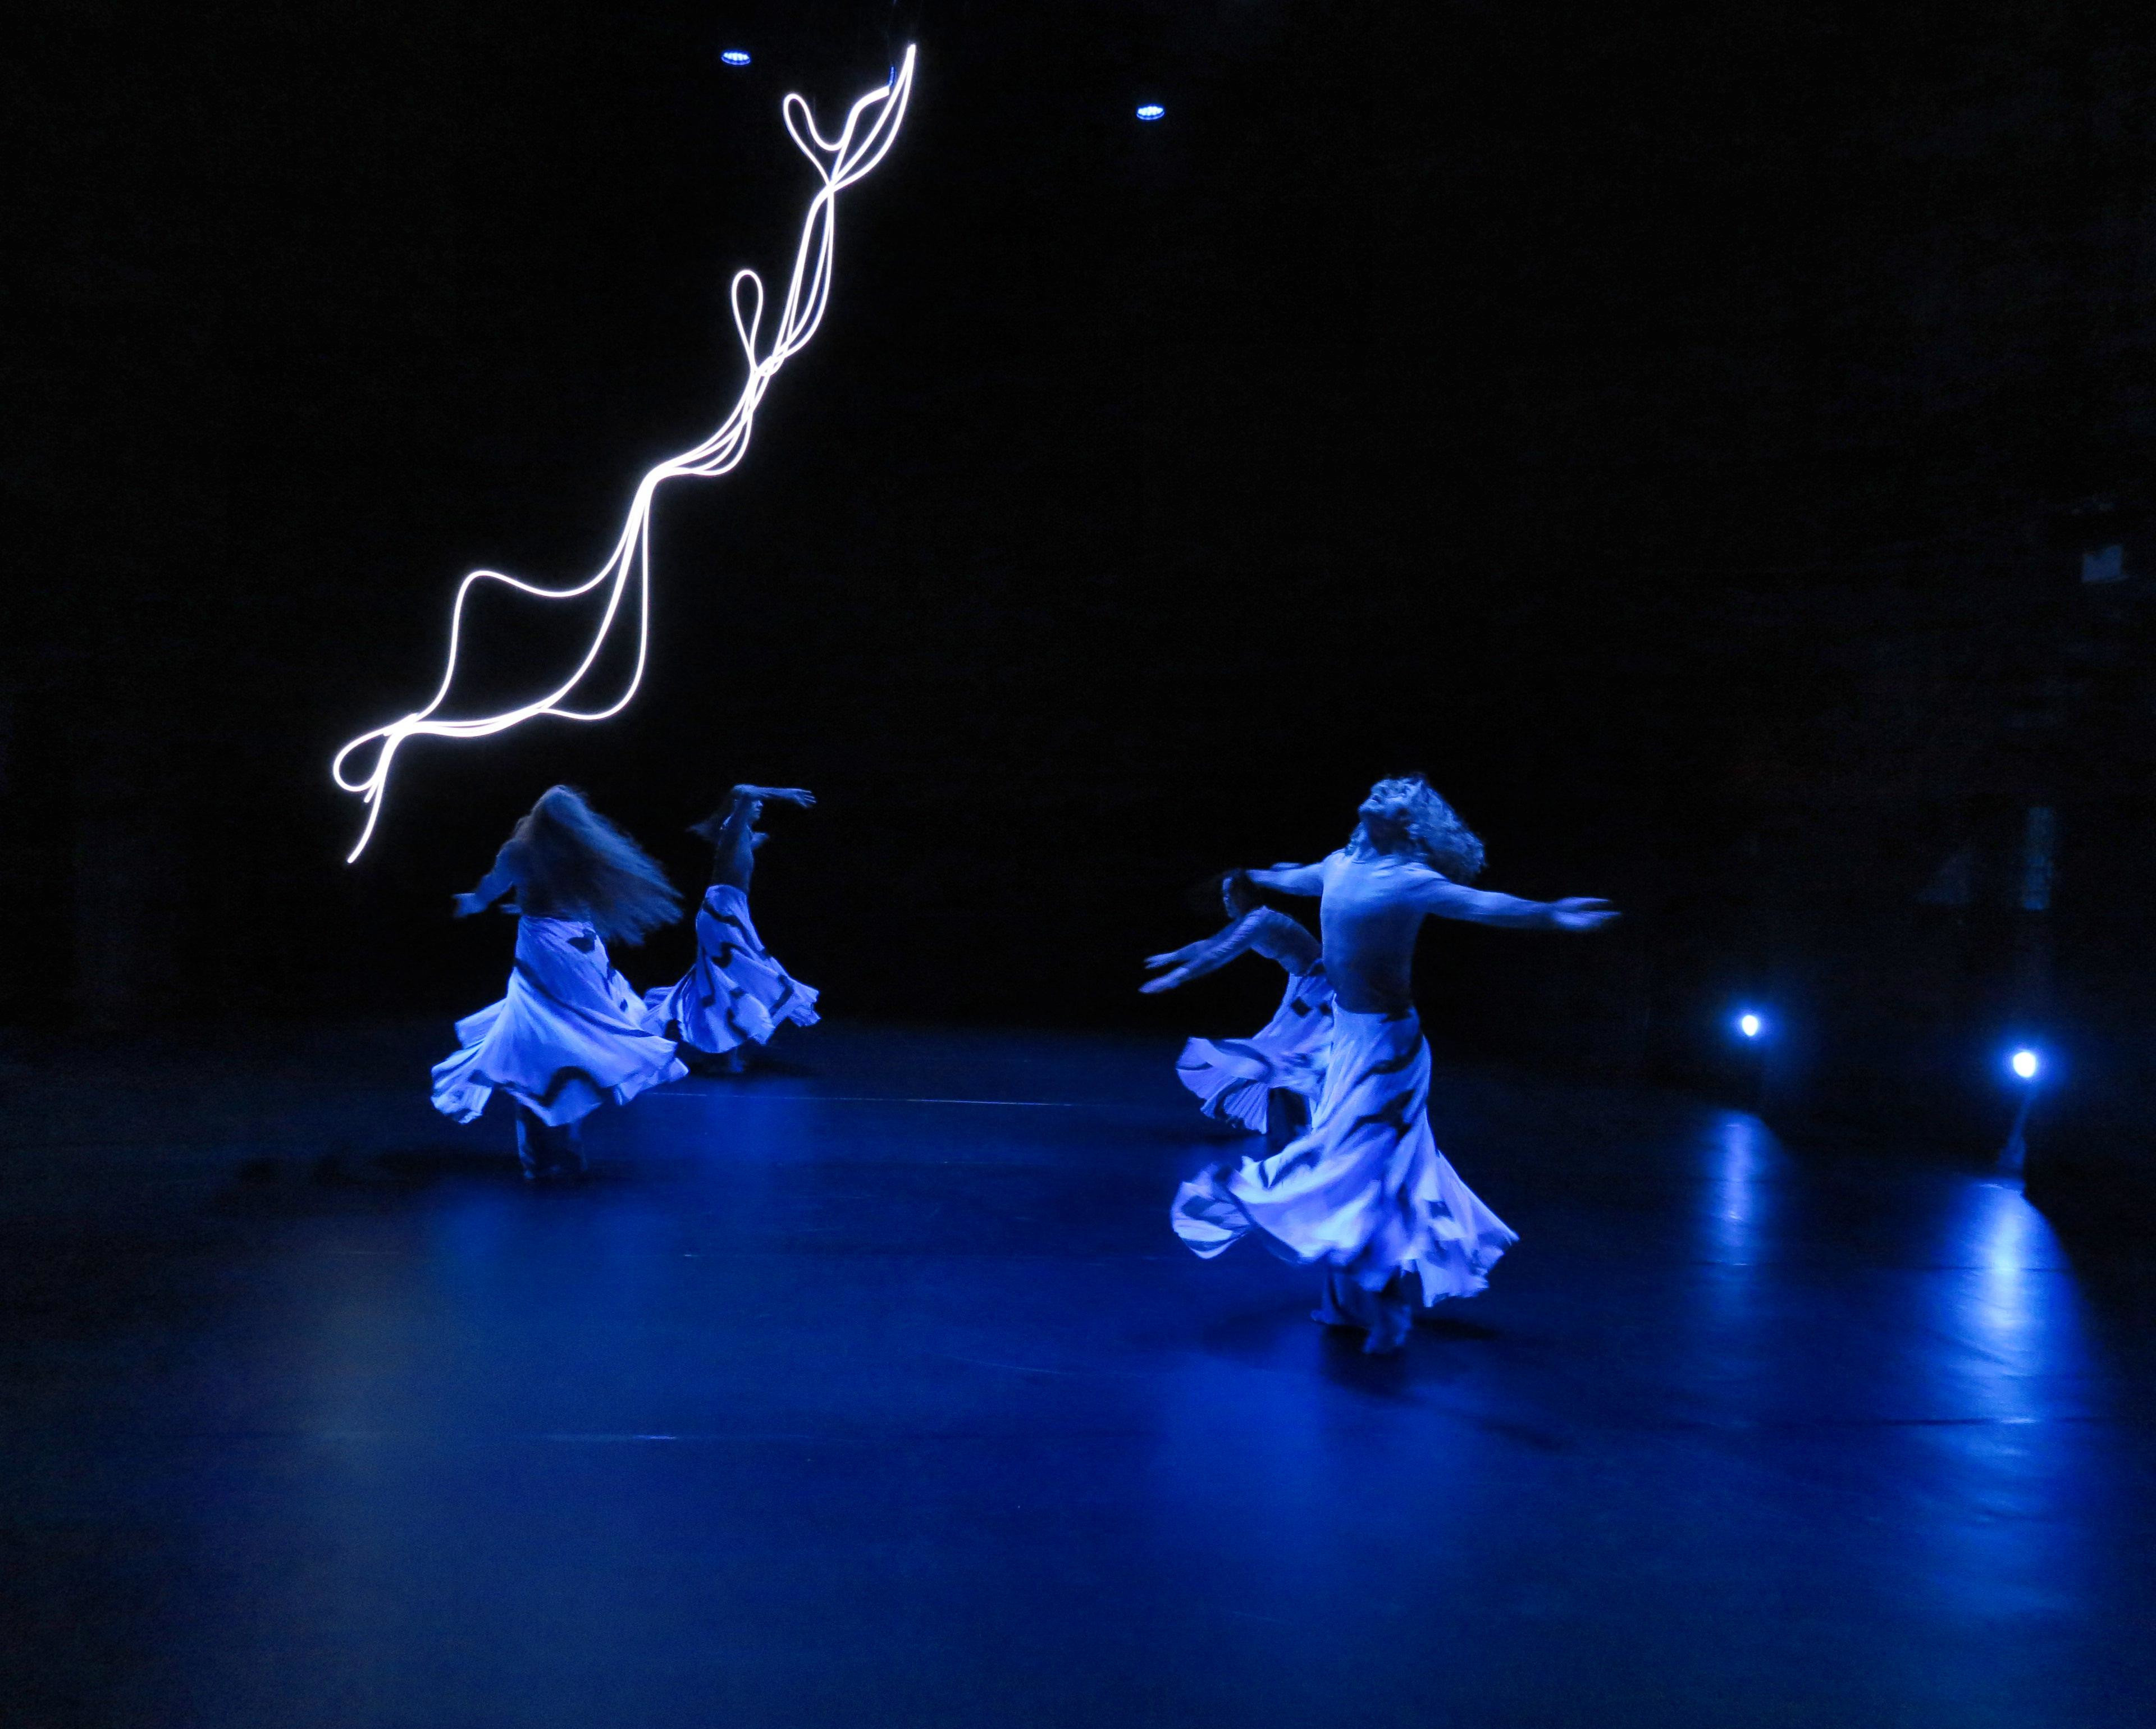 a group of dancers in skirts twirling rapturously against the the bright light sculpture